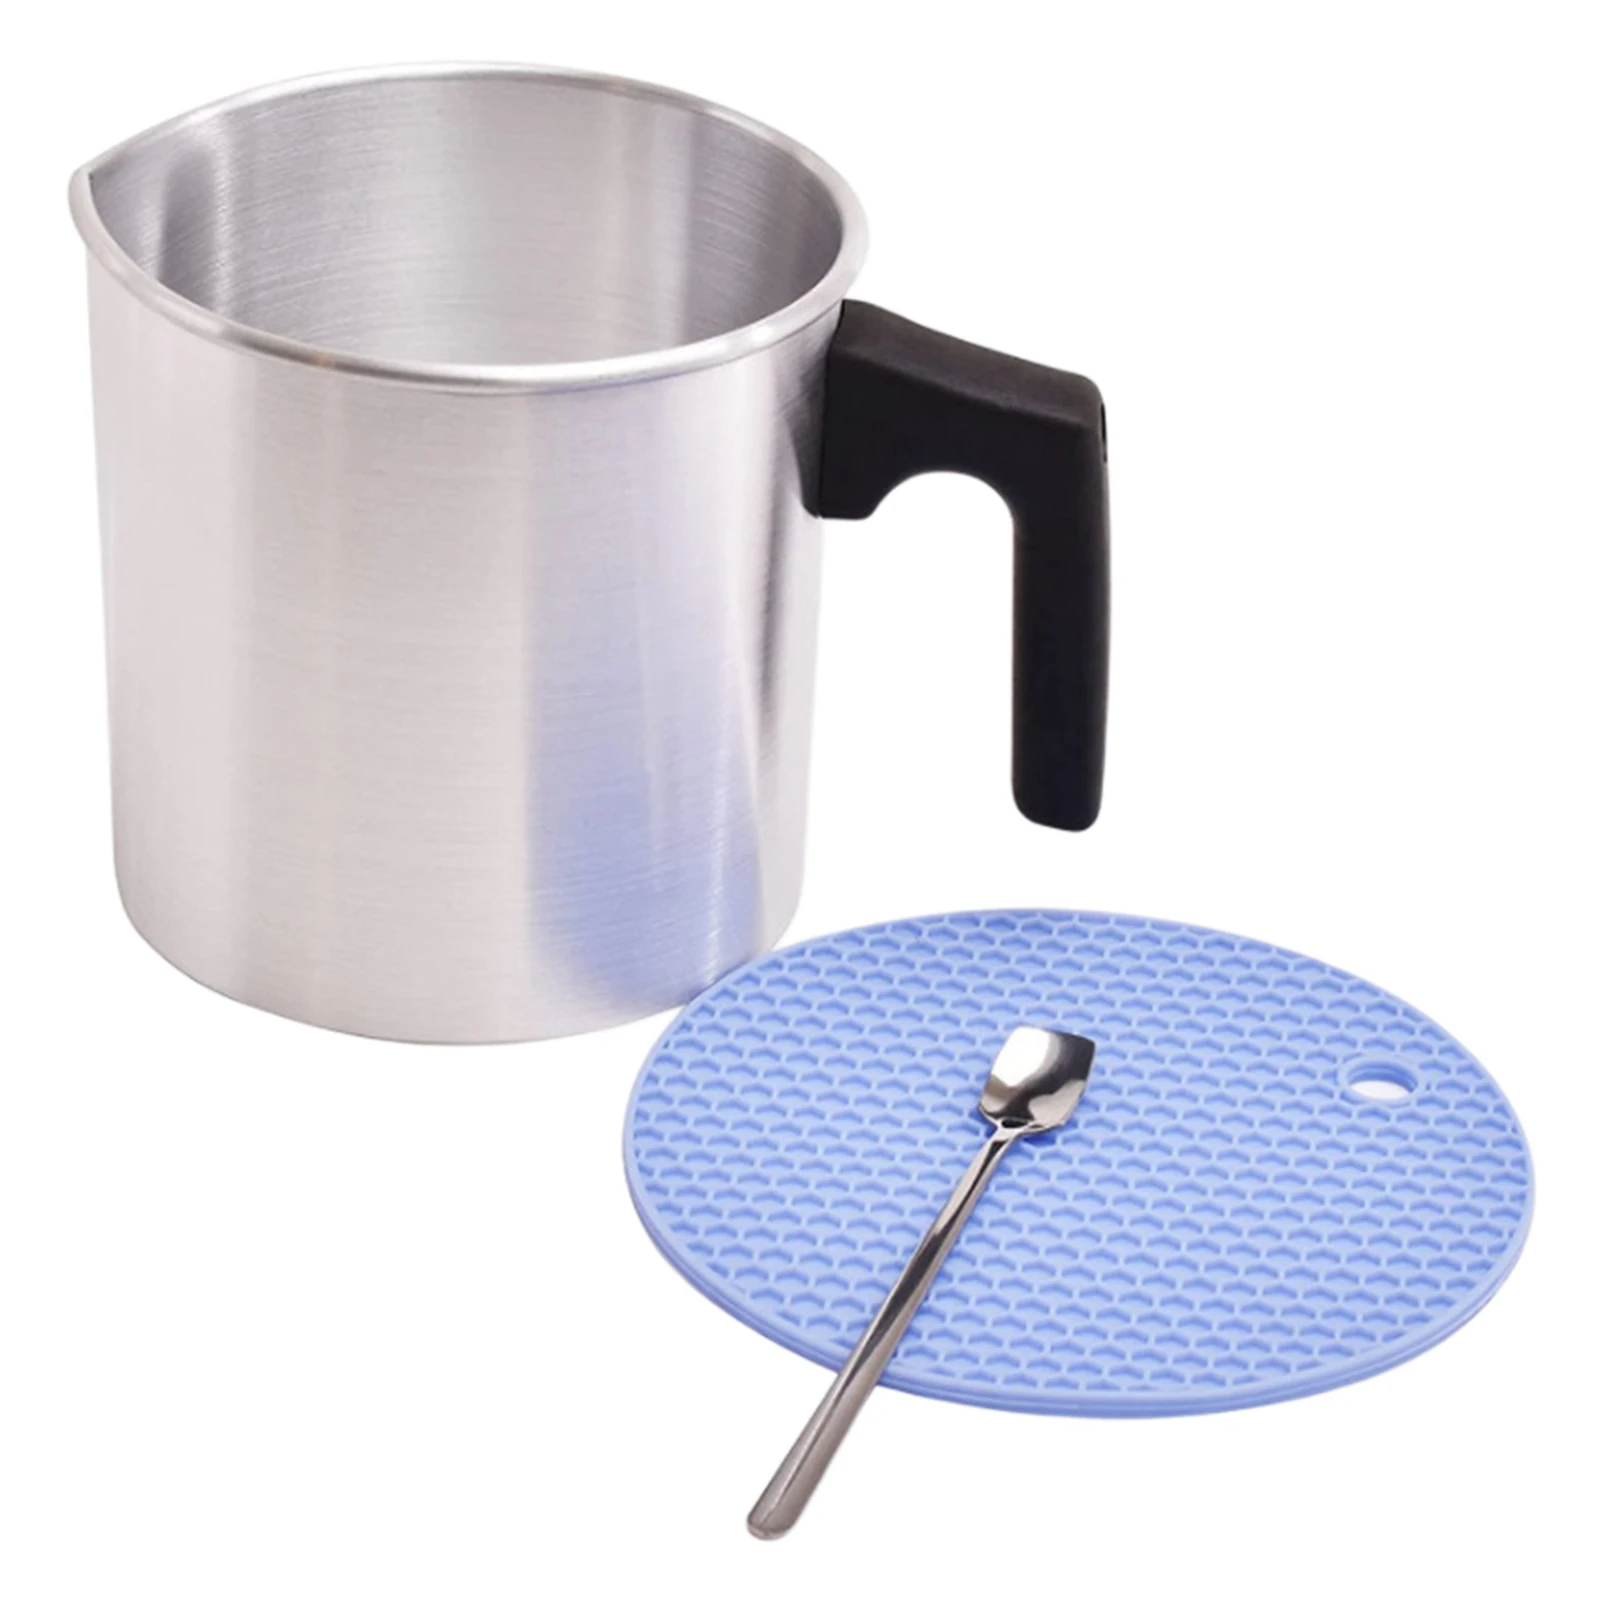 Candle Making Pouring Pot, Dripless Pouring Spout; Heat-Resisting Wax Melting Pot, Aluminum Pitcher w/ Long Spoon and Cup Mat